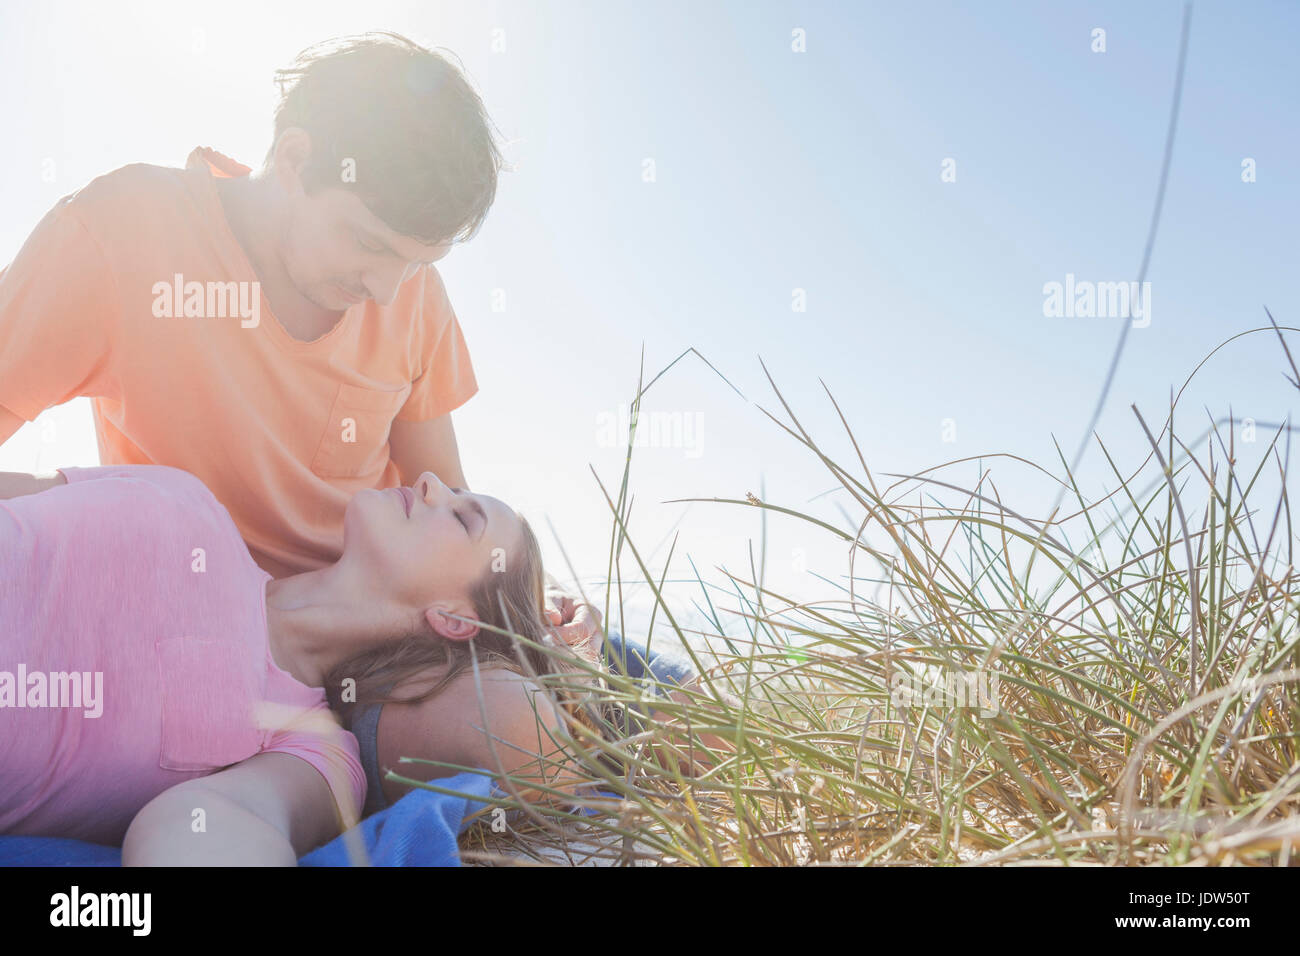 Couple sitting in grass, woman's head on man's lap Stock Photo